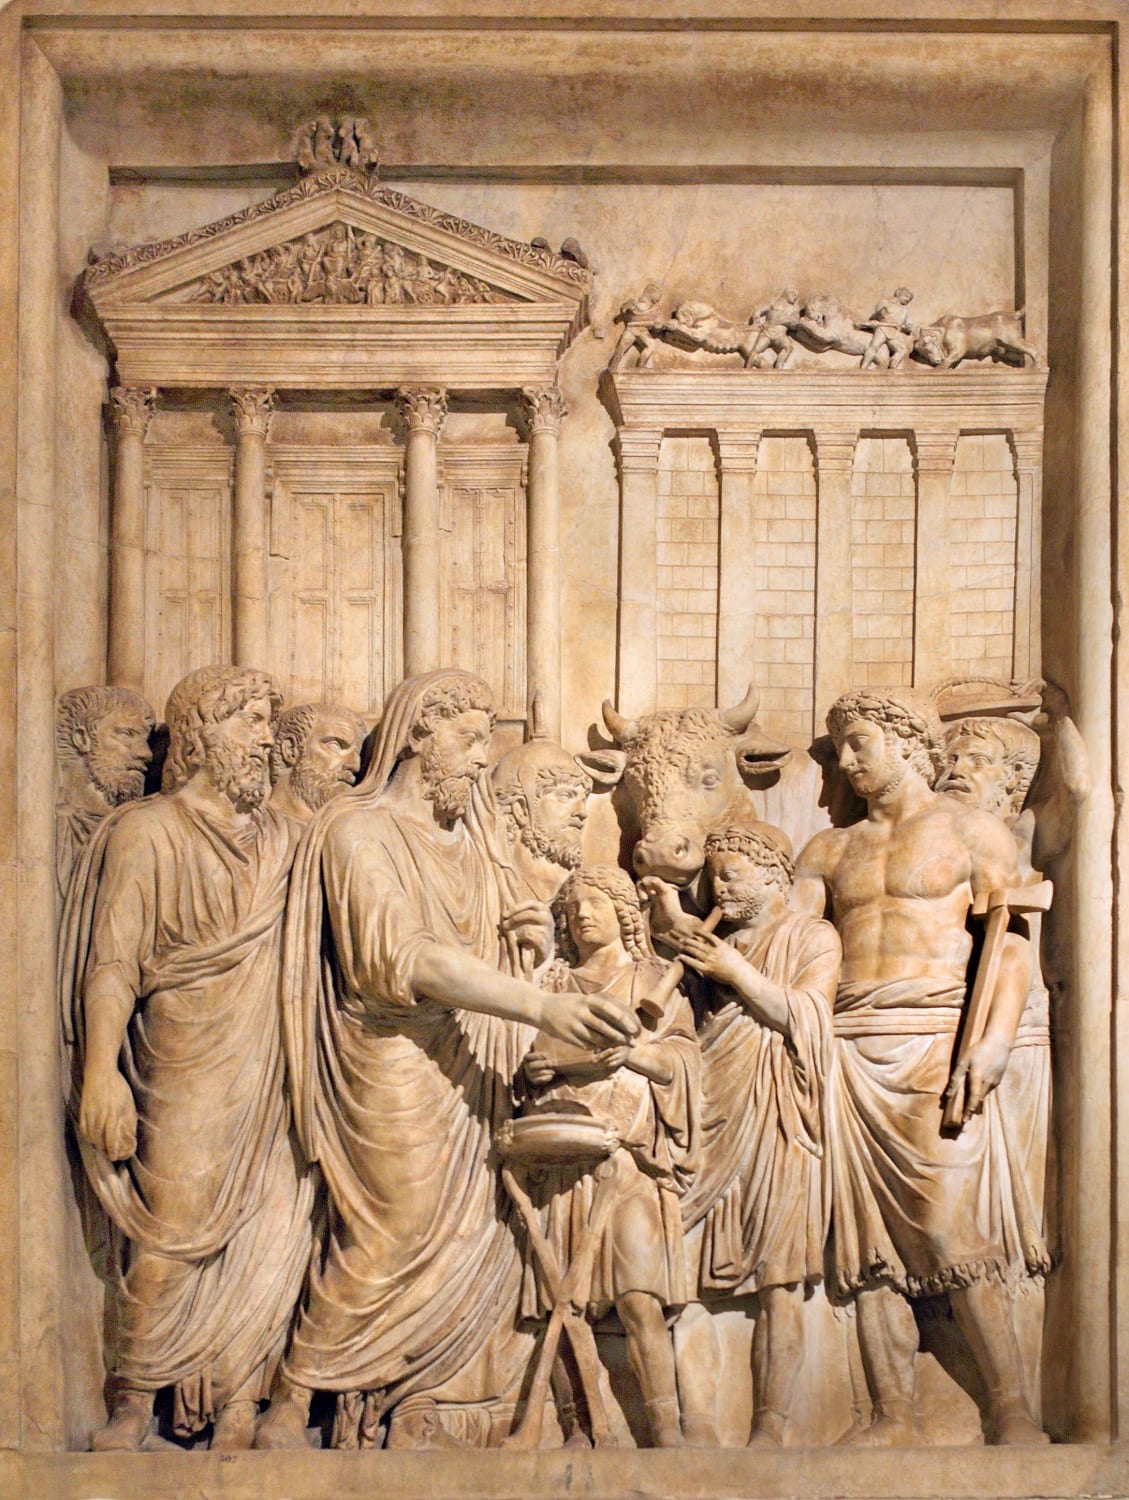 A bas-relief showing the Emperor Marcus Aurelius and members of the Imperial family offering a sacrifice in gratitude for success against Germanic tribes. 2nd century CE, now on display at the Capitoline Museums in Rome